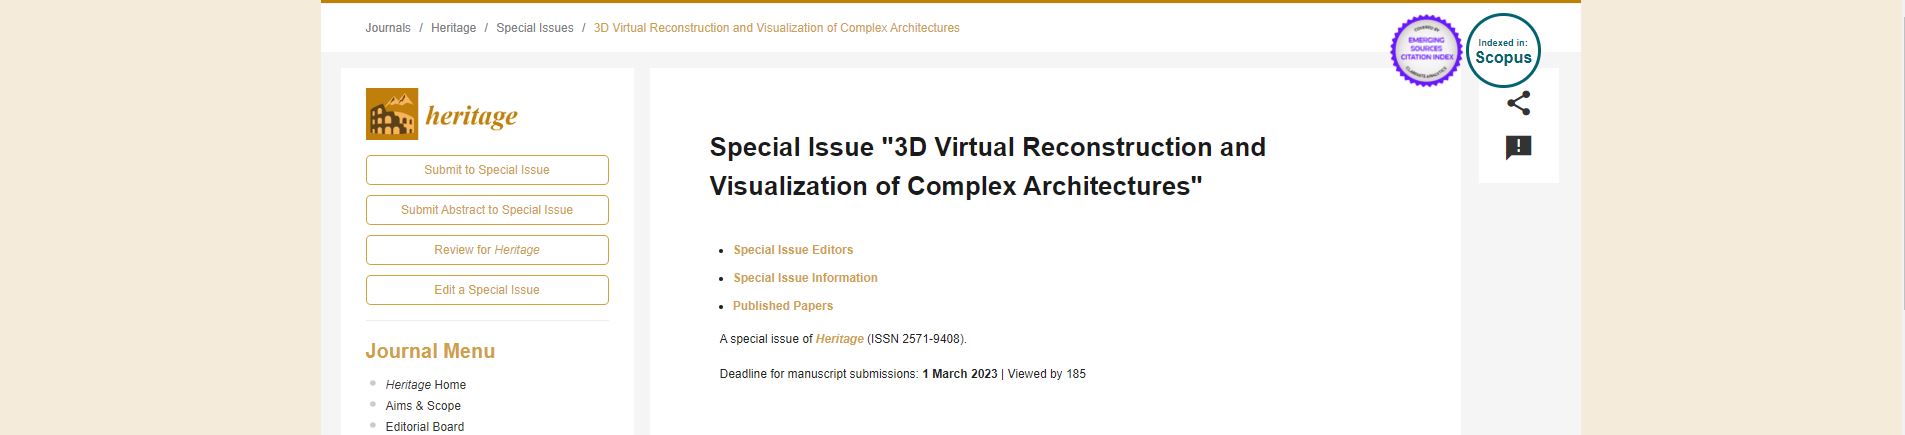 Special Issue “3D Virtual Reconstruction and Visualization of Complex Architectures”